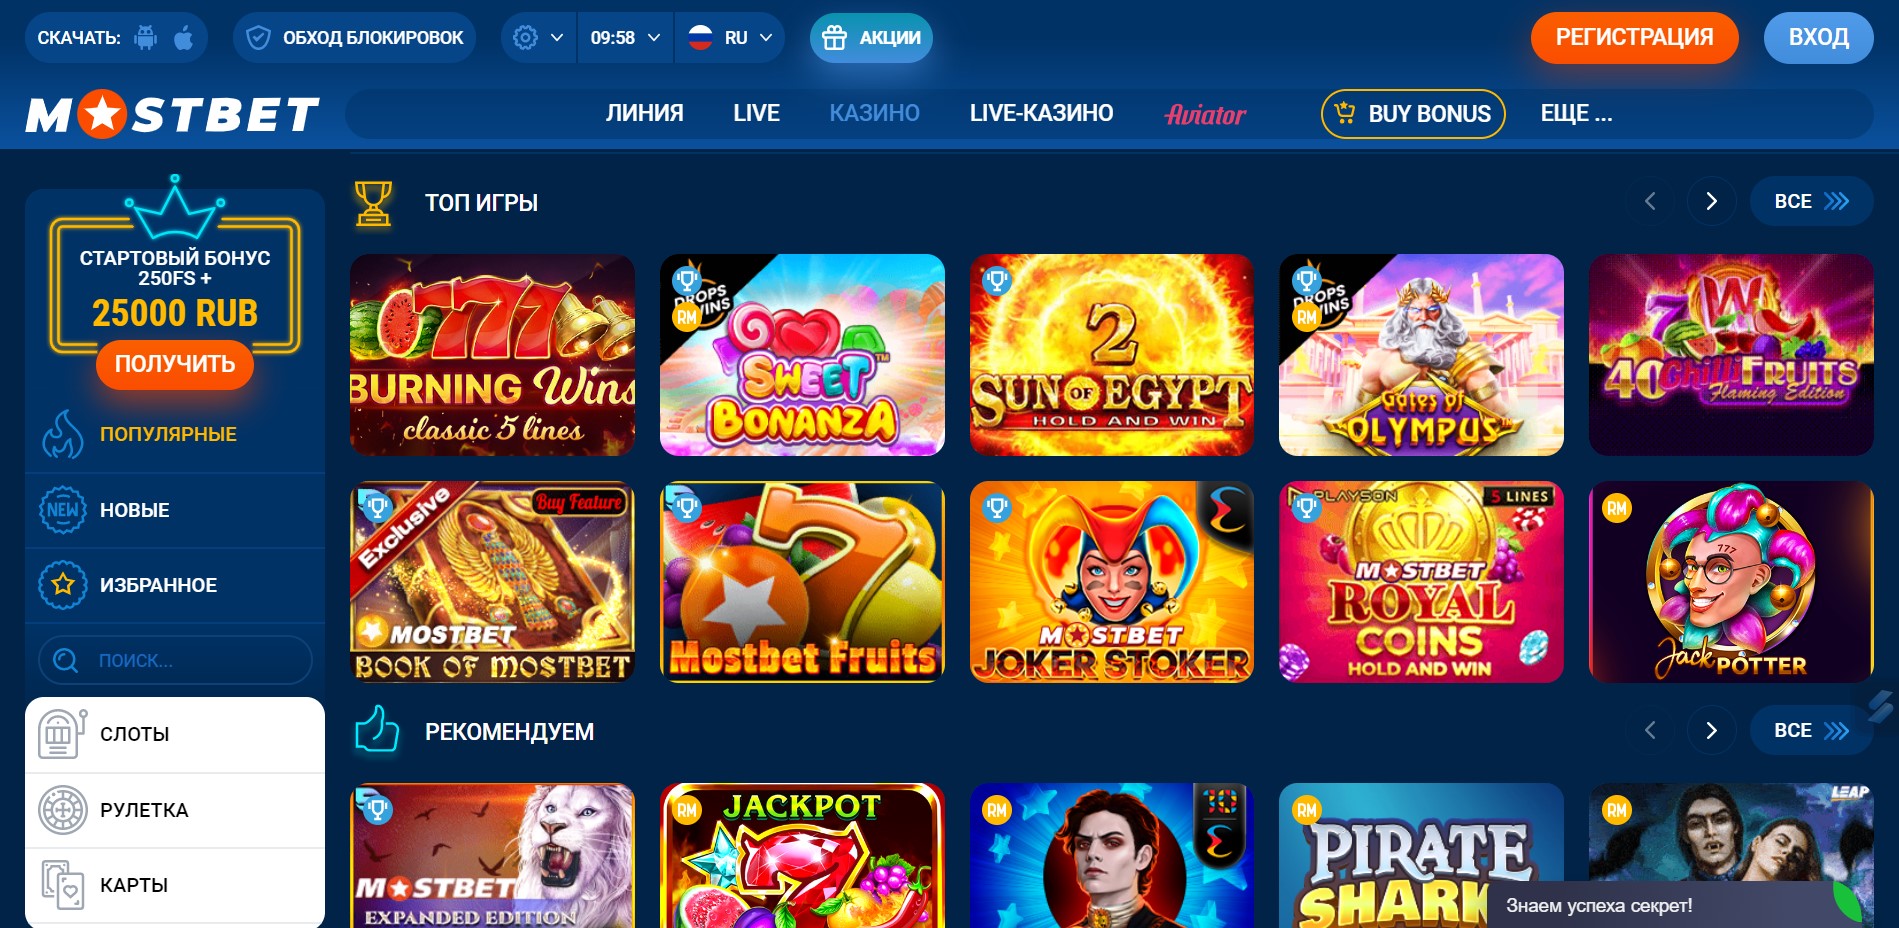 15 No Cost Ways To Get More With casino